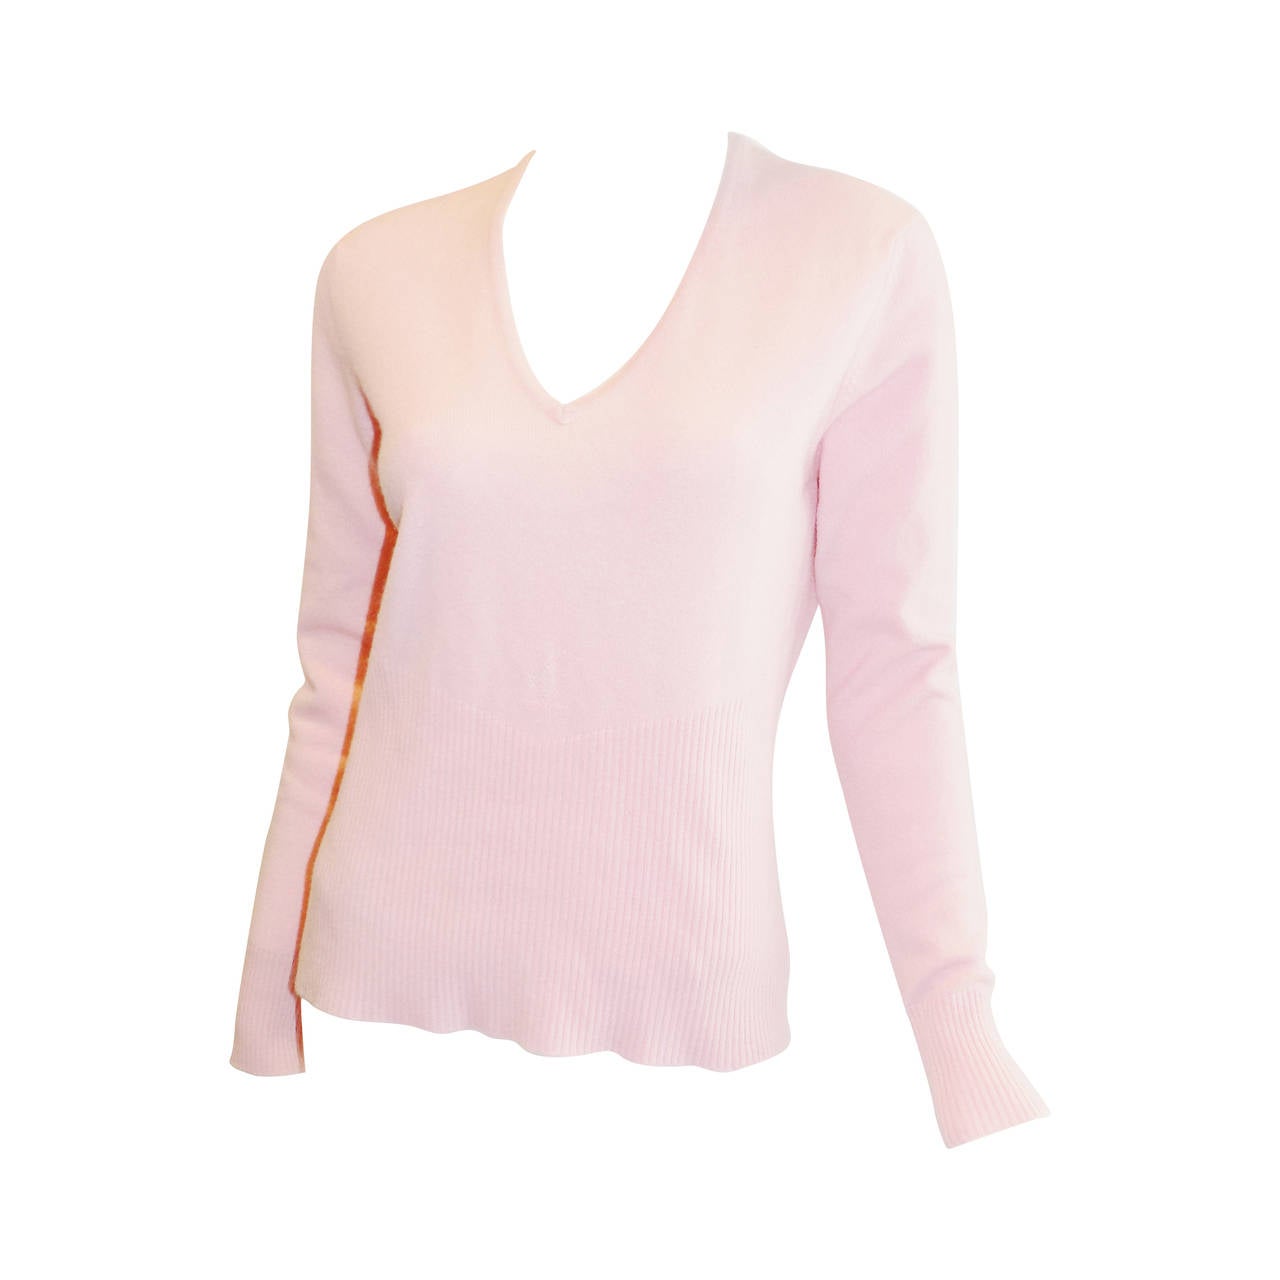 Chanel lite pink cashmere sweater